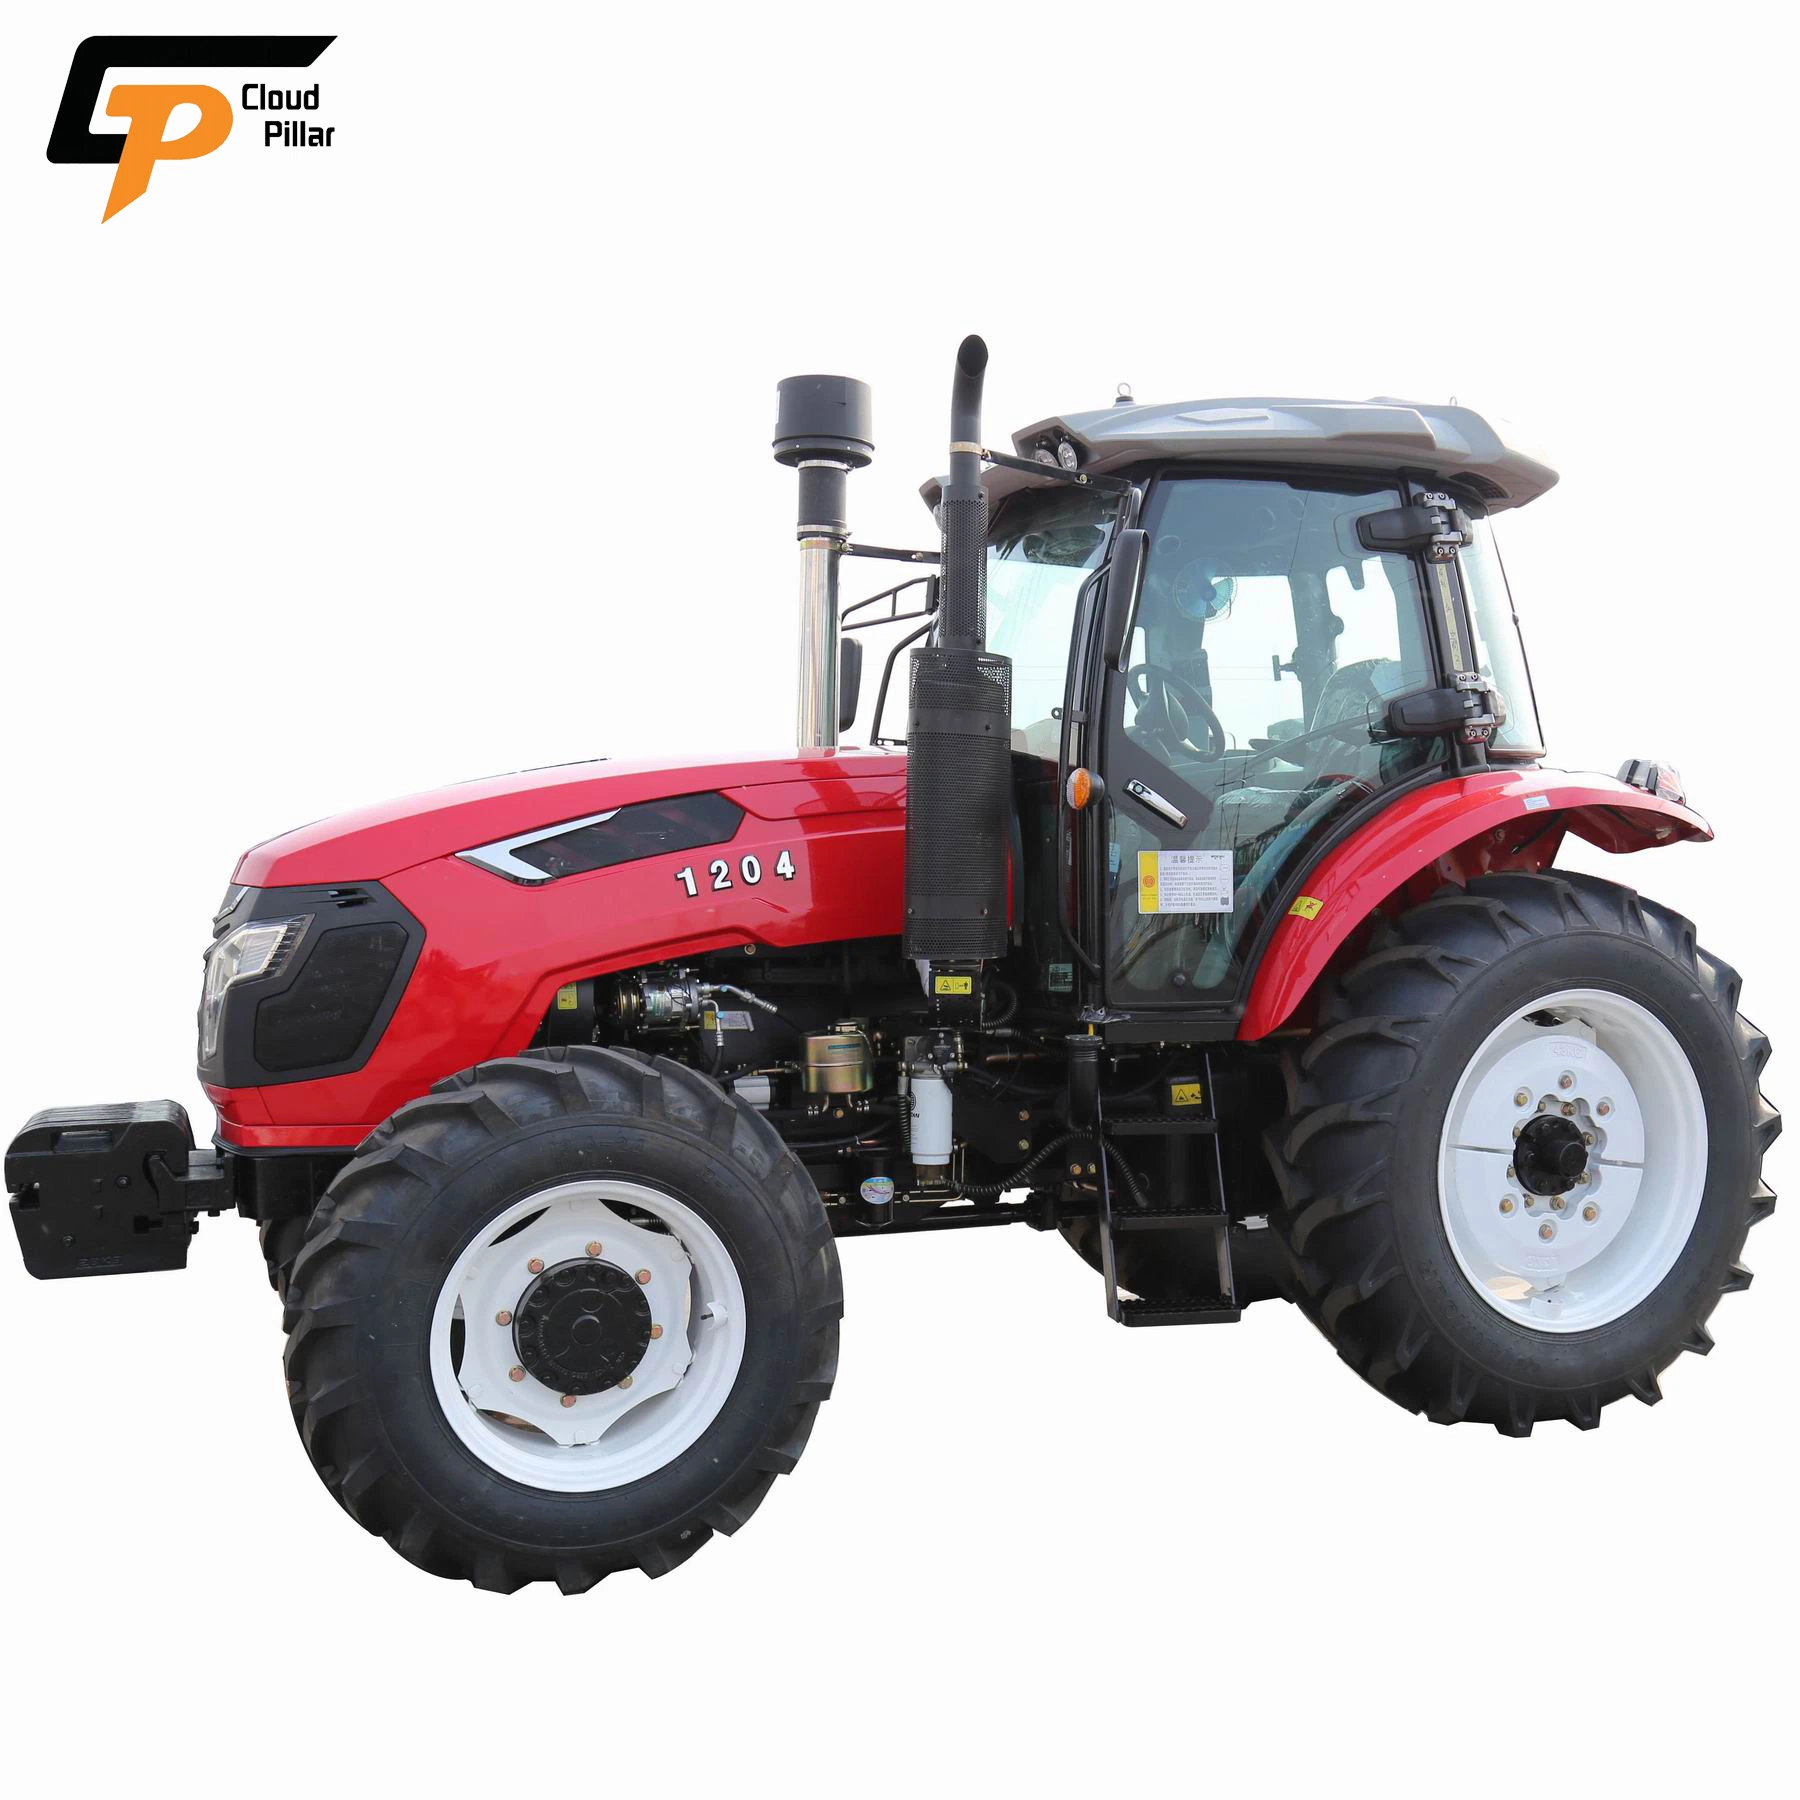 China Weifang Manufacturer Agriculture Machinery Yto Yuchai Weichai 6 Cylinders Engine 4X4 4WD 120HP Cheap Big Forestry Tractors for Logging Price